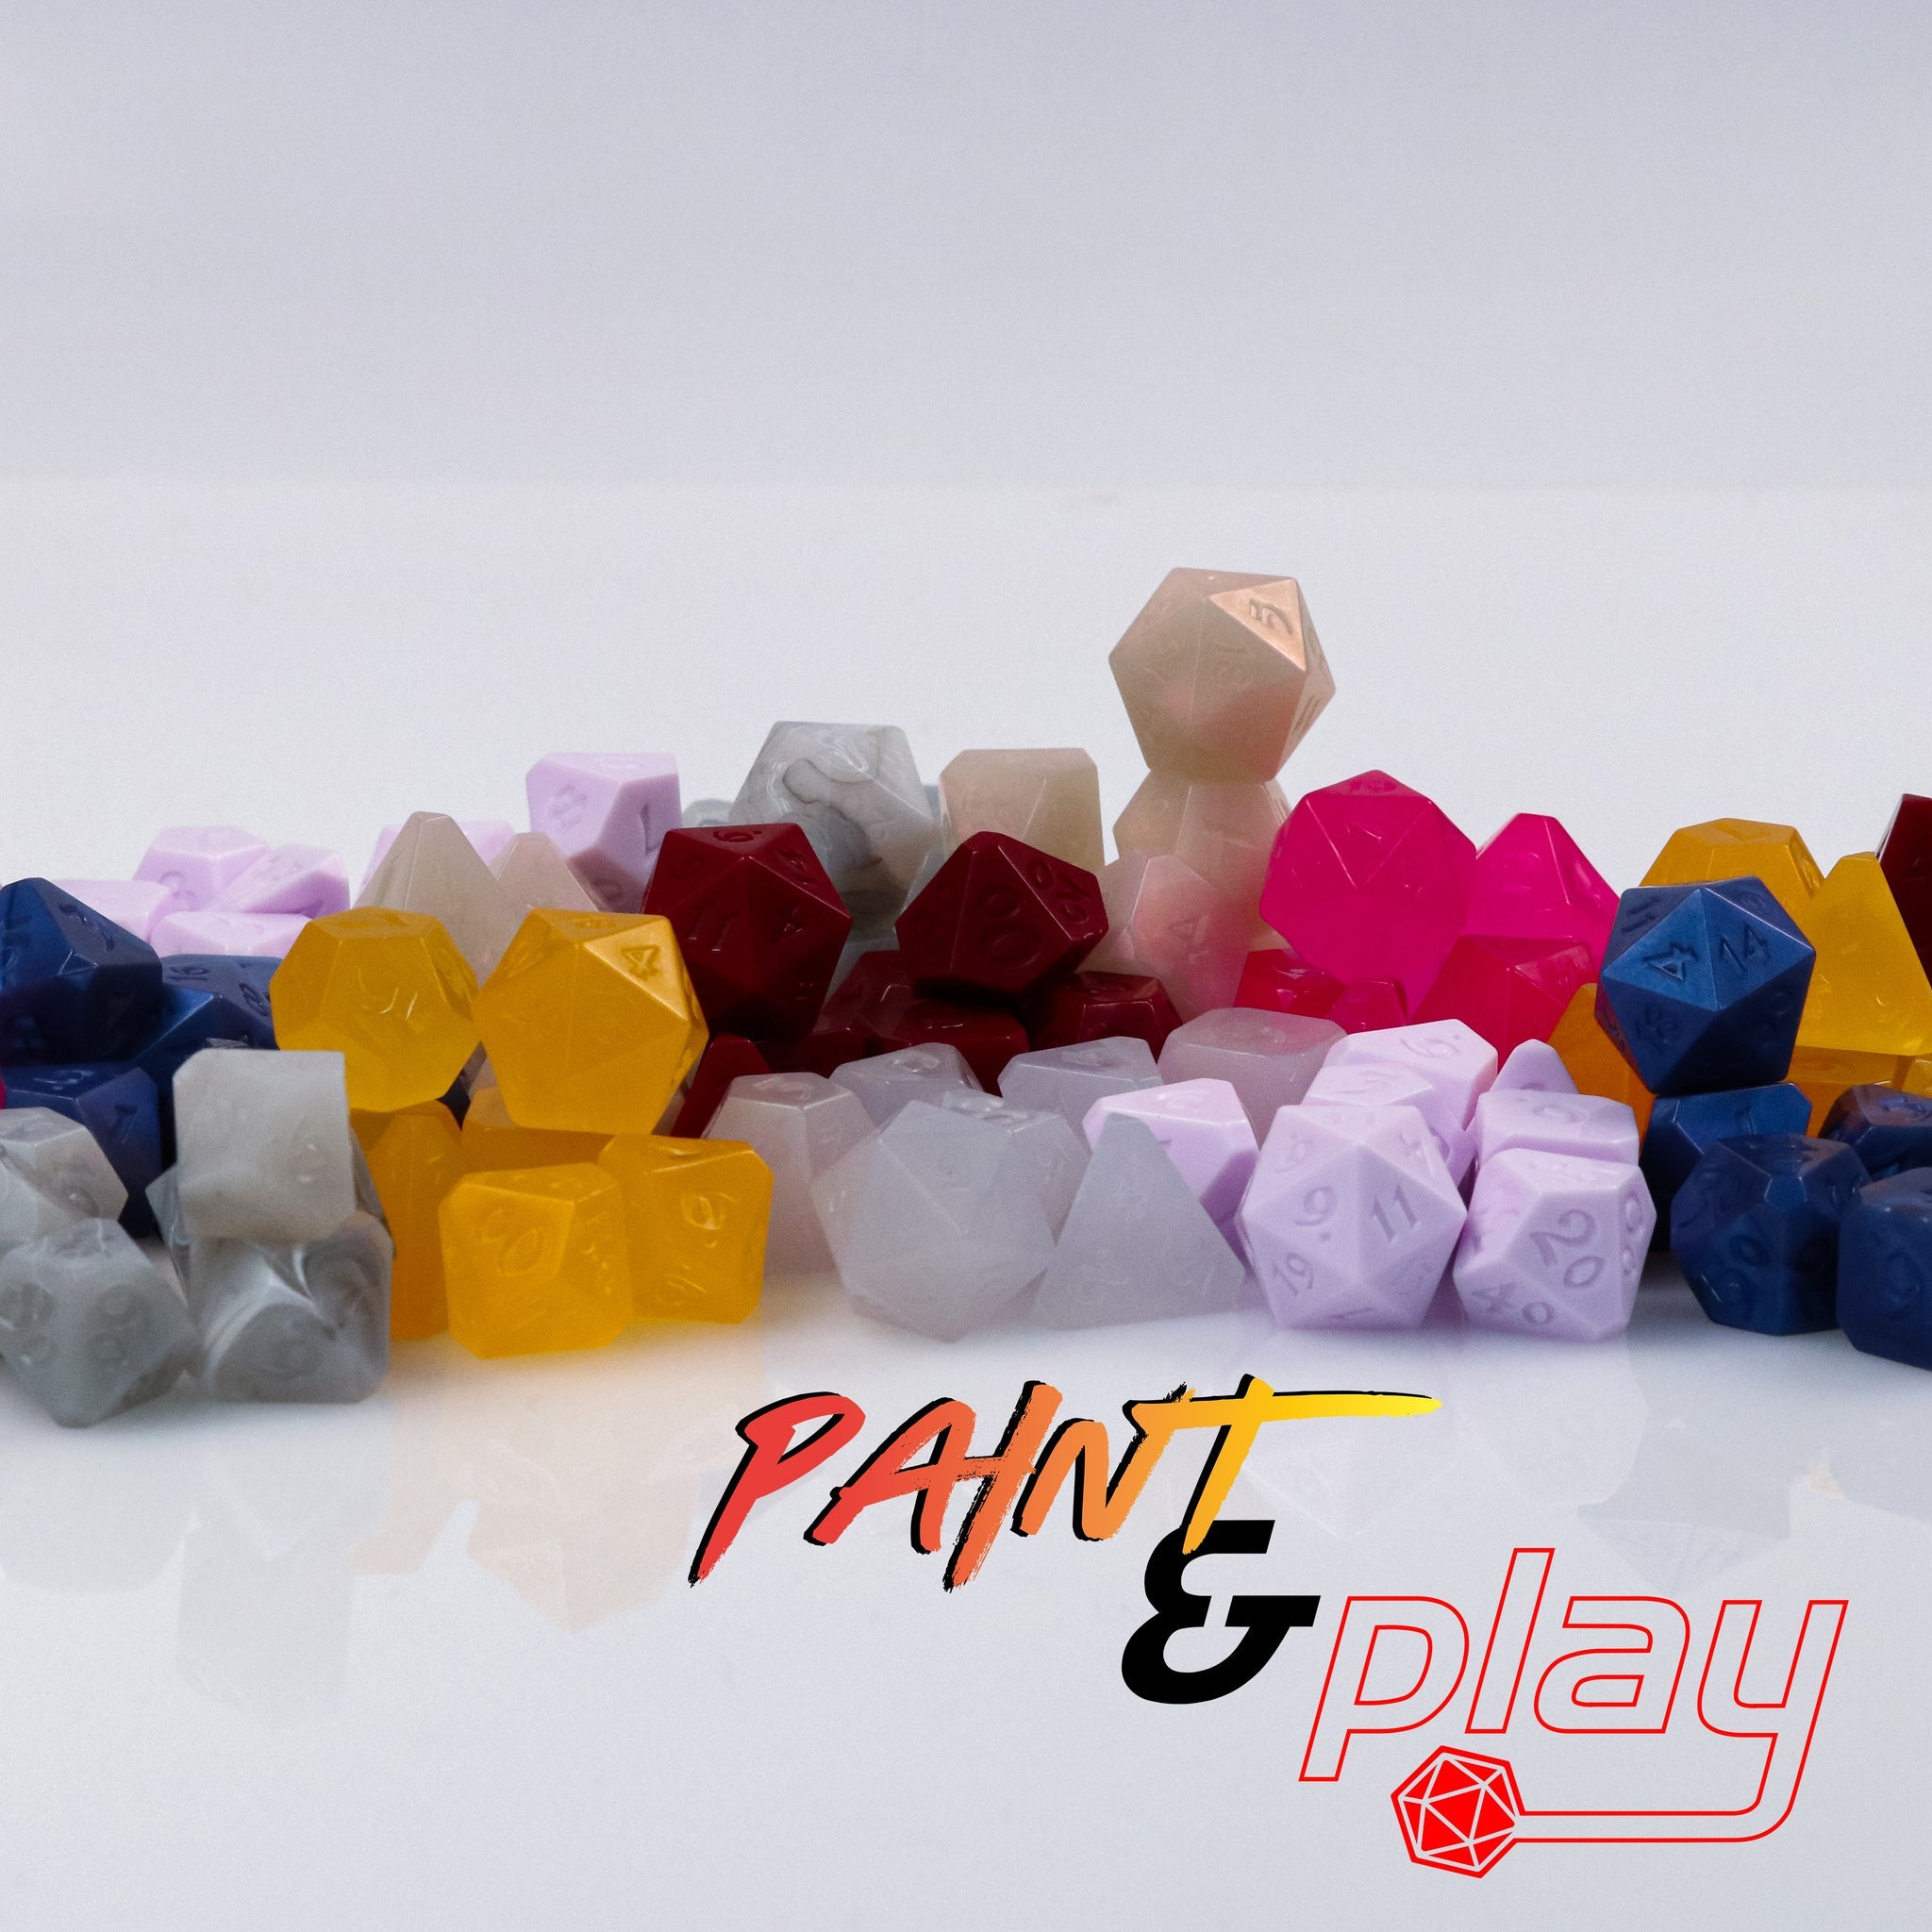 Die hard Dice Paint and Play Dice Party Box | D20 Games